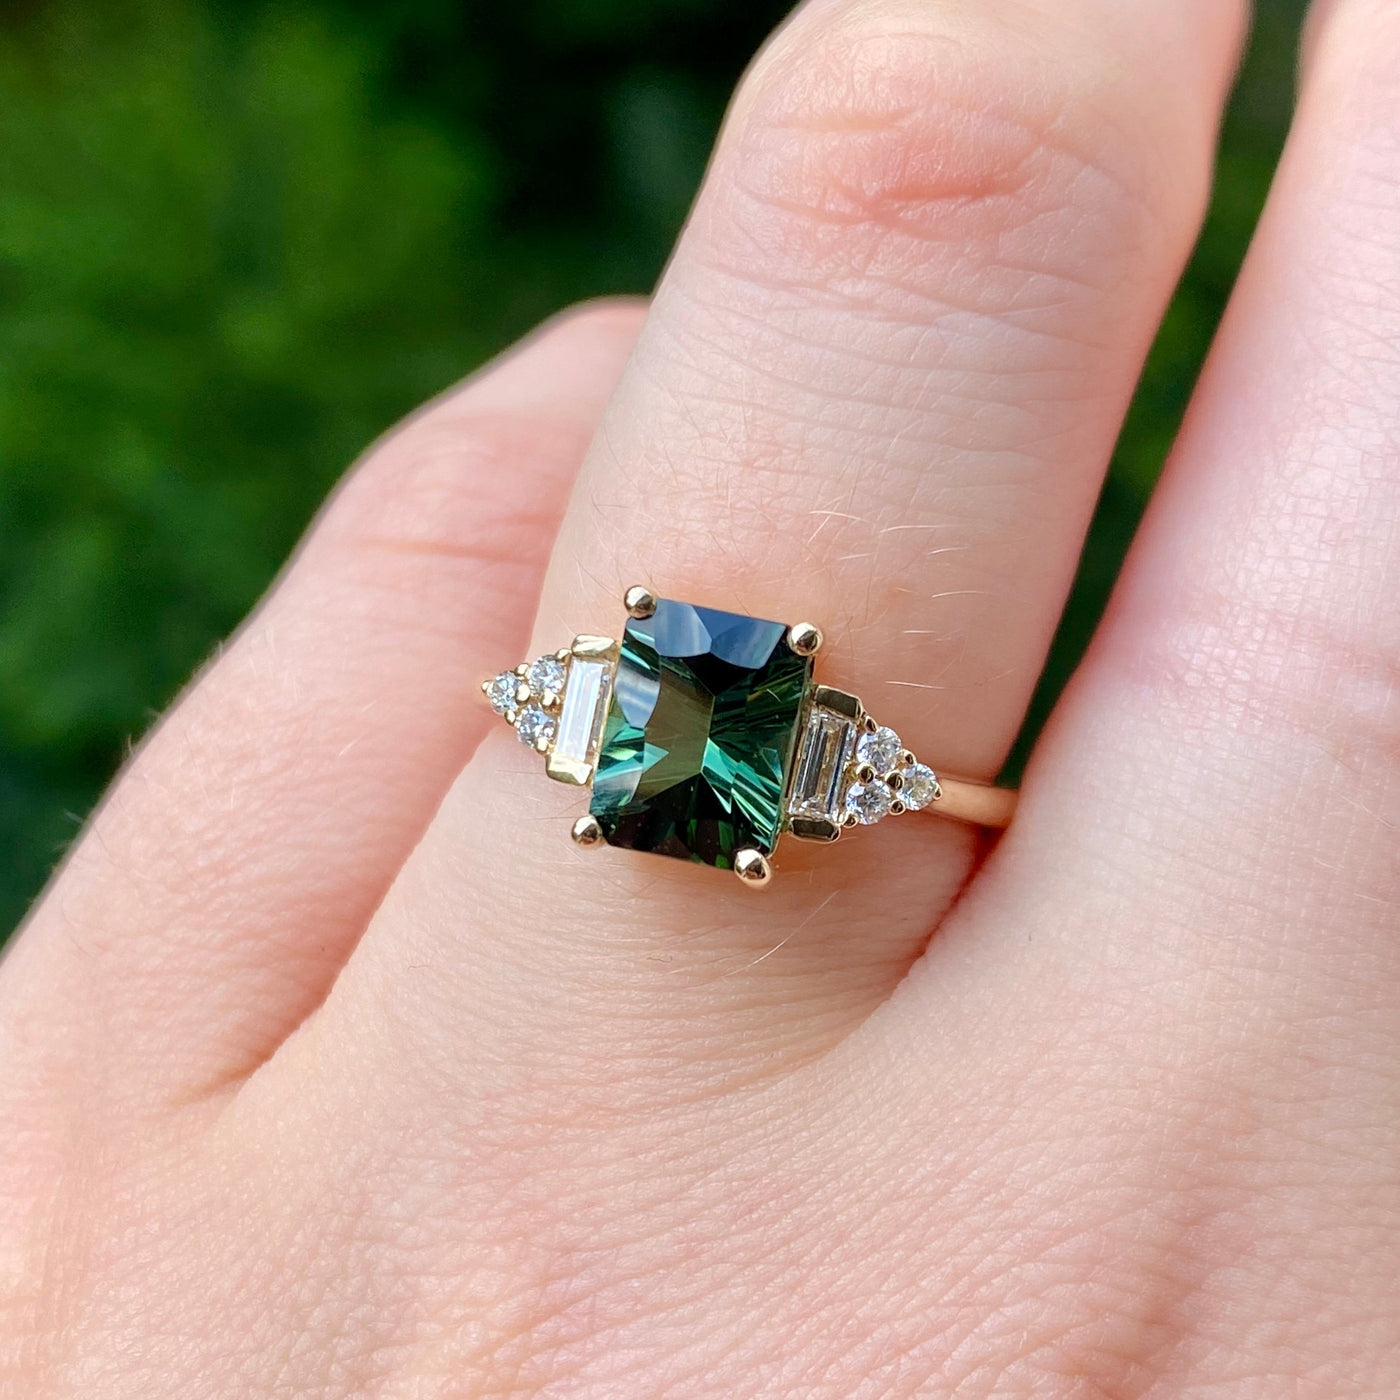 Arden - Optix Octagon Cut Green Teal Tourmaline Art Deco Engagement Ring with Lab Grown Diamond Side Stones - Custom Made-to-Order Design